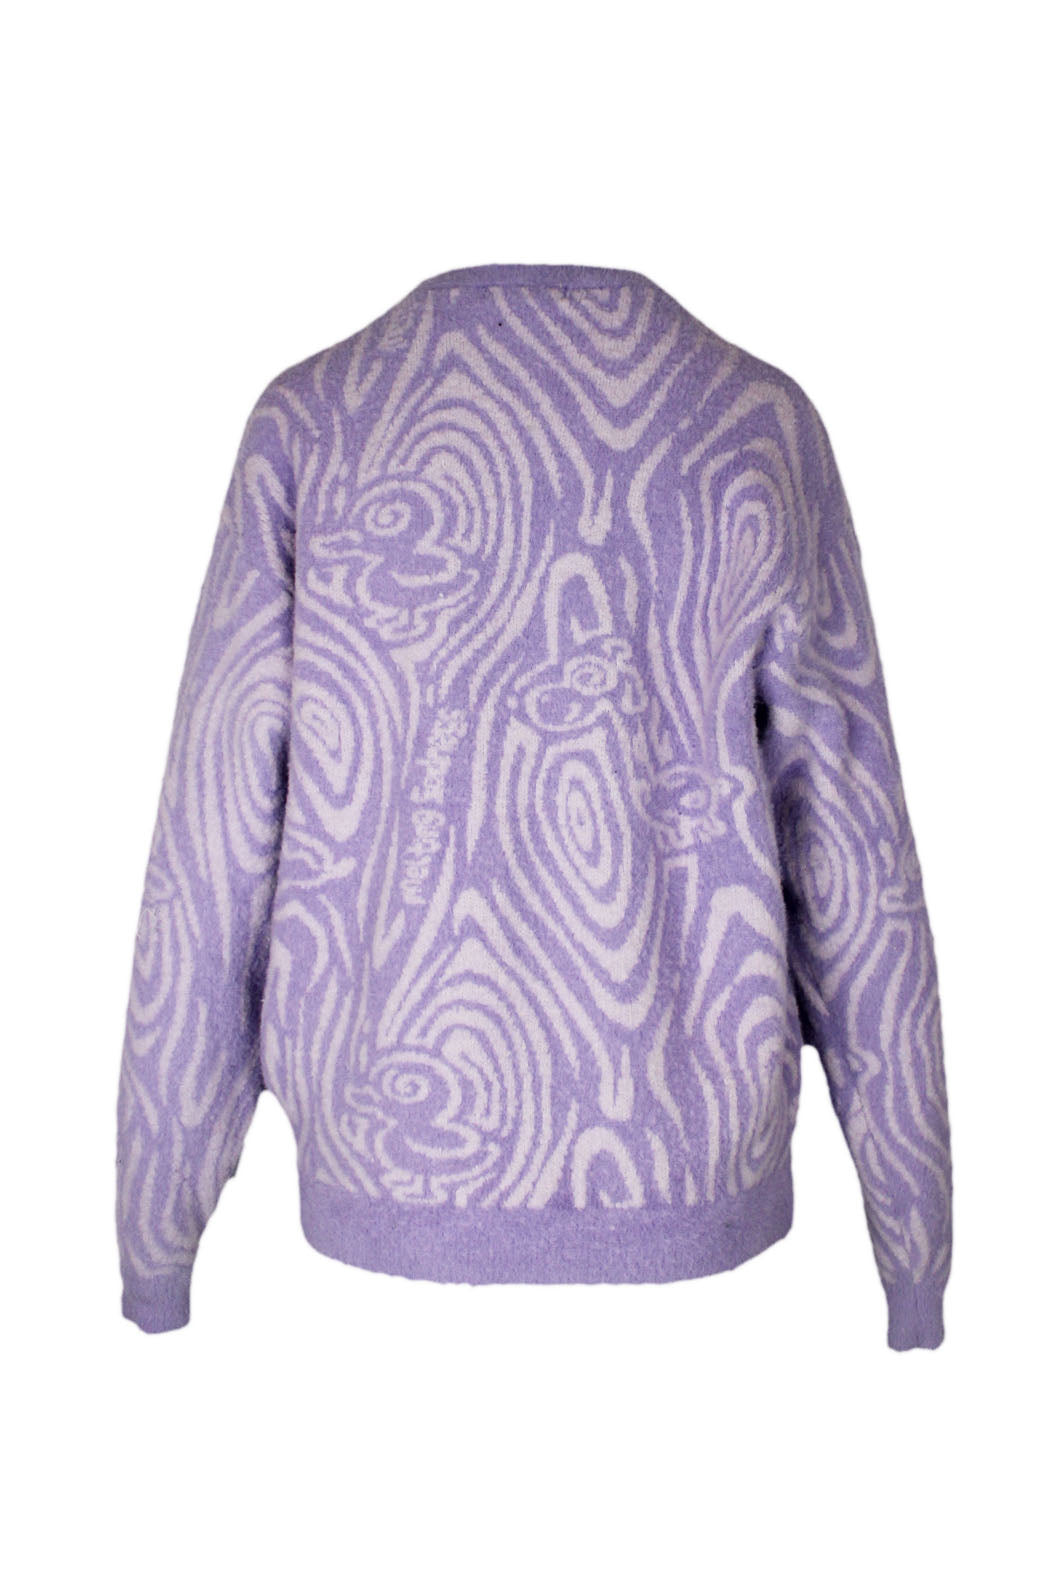 back view melting sadness light purple long sleeve sweater. features abstract white swirl design, crew neckline, billowing at sleeves and tapering at waist. 